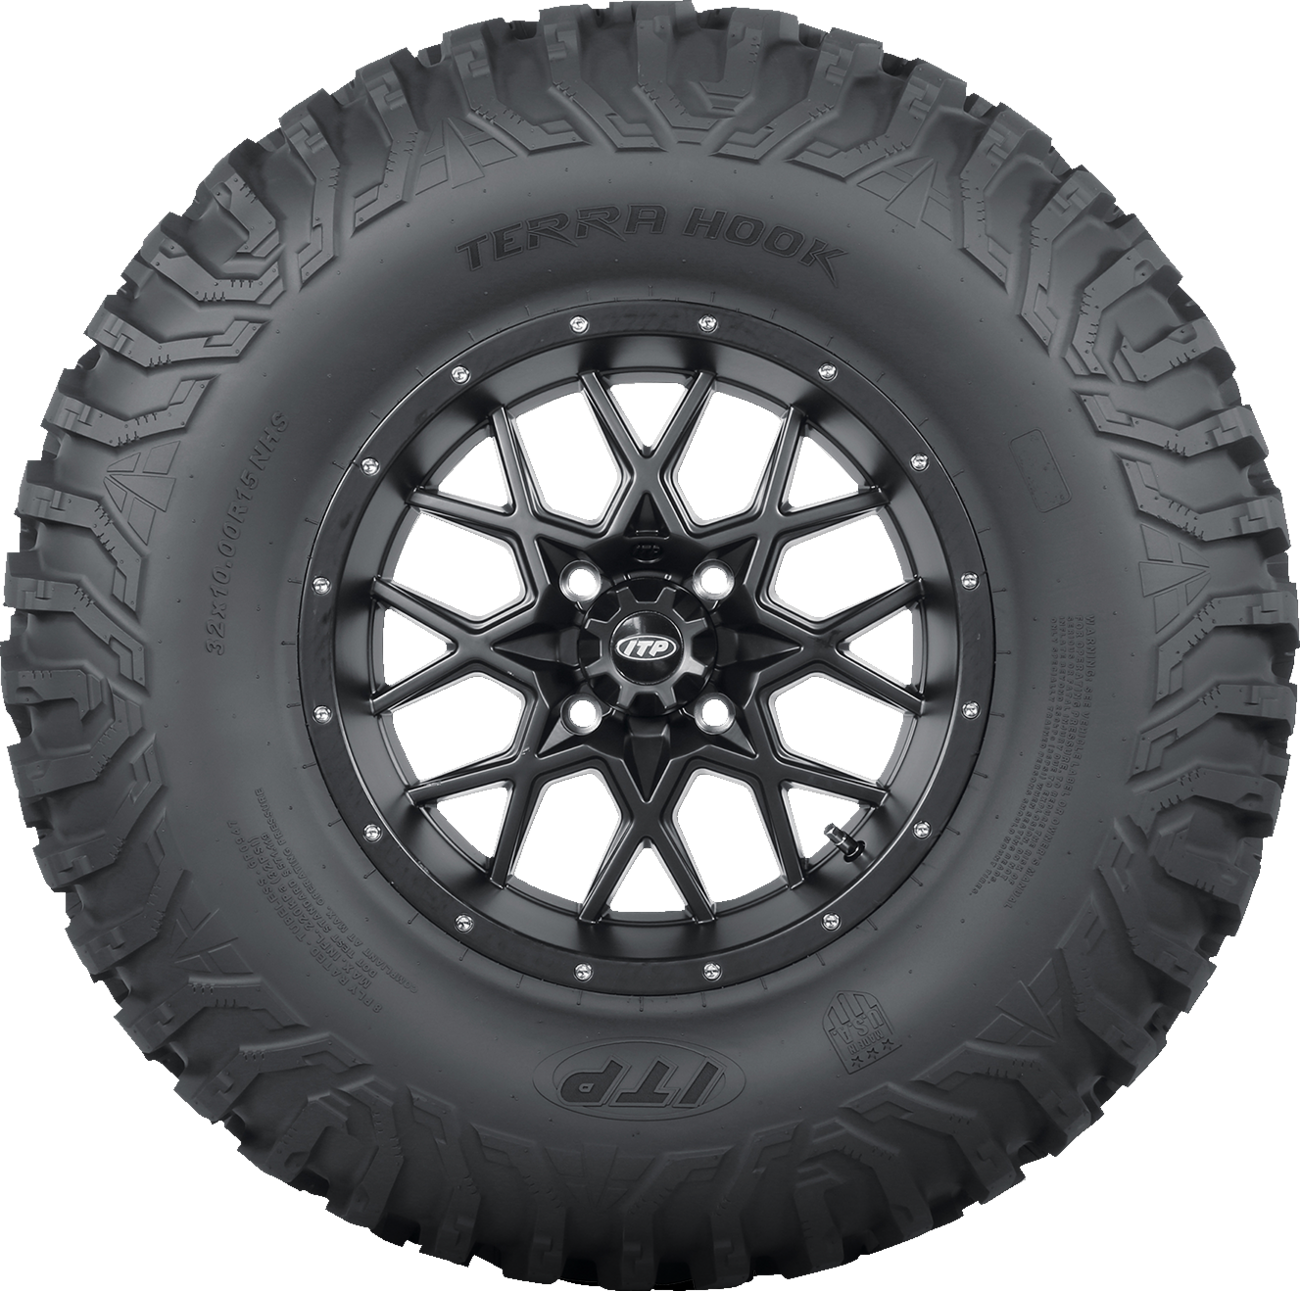 ITP Tire - Terra Hook - Front/Rear - 32x10R15 - 8 Ply 6P0947